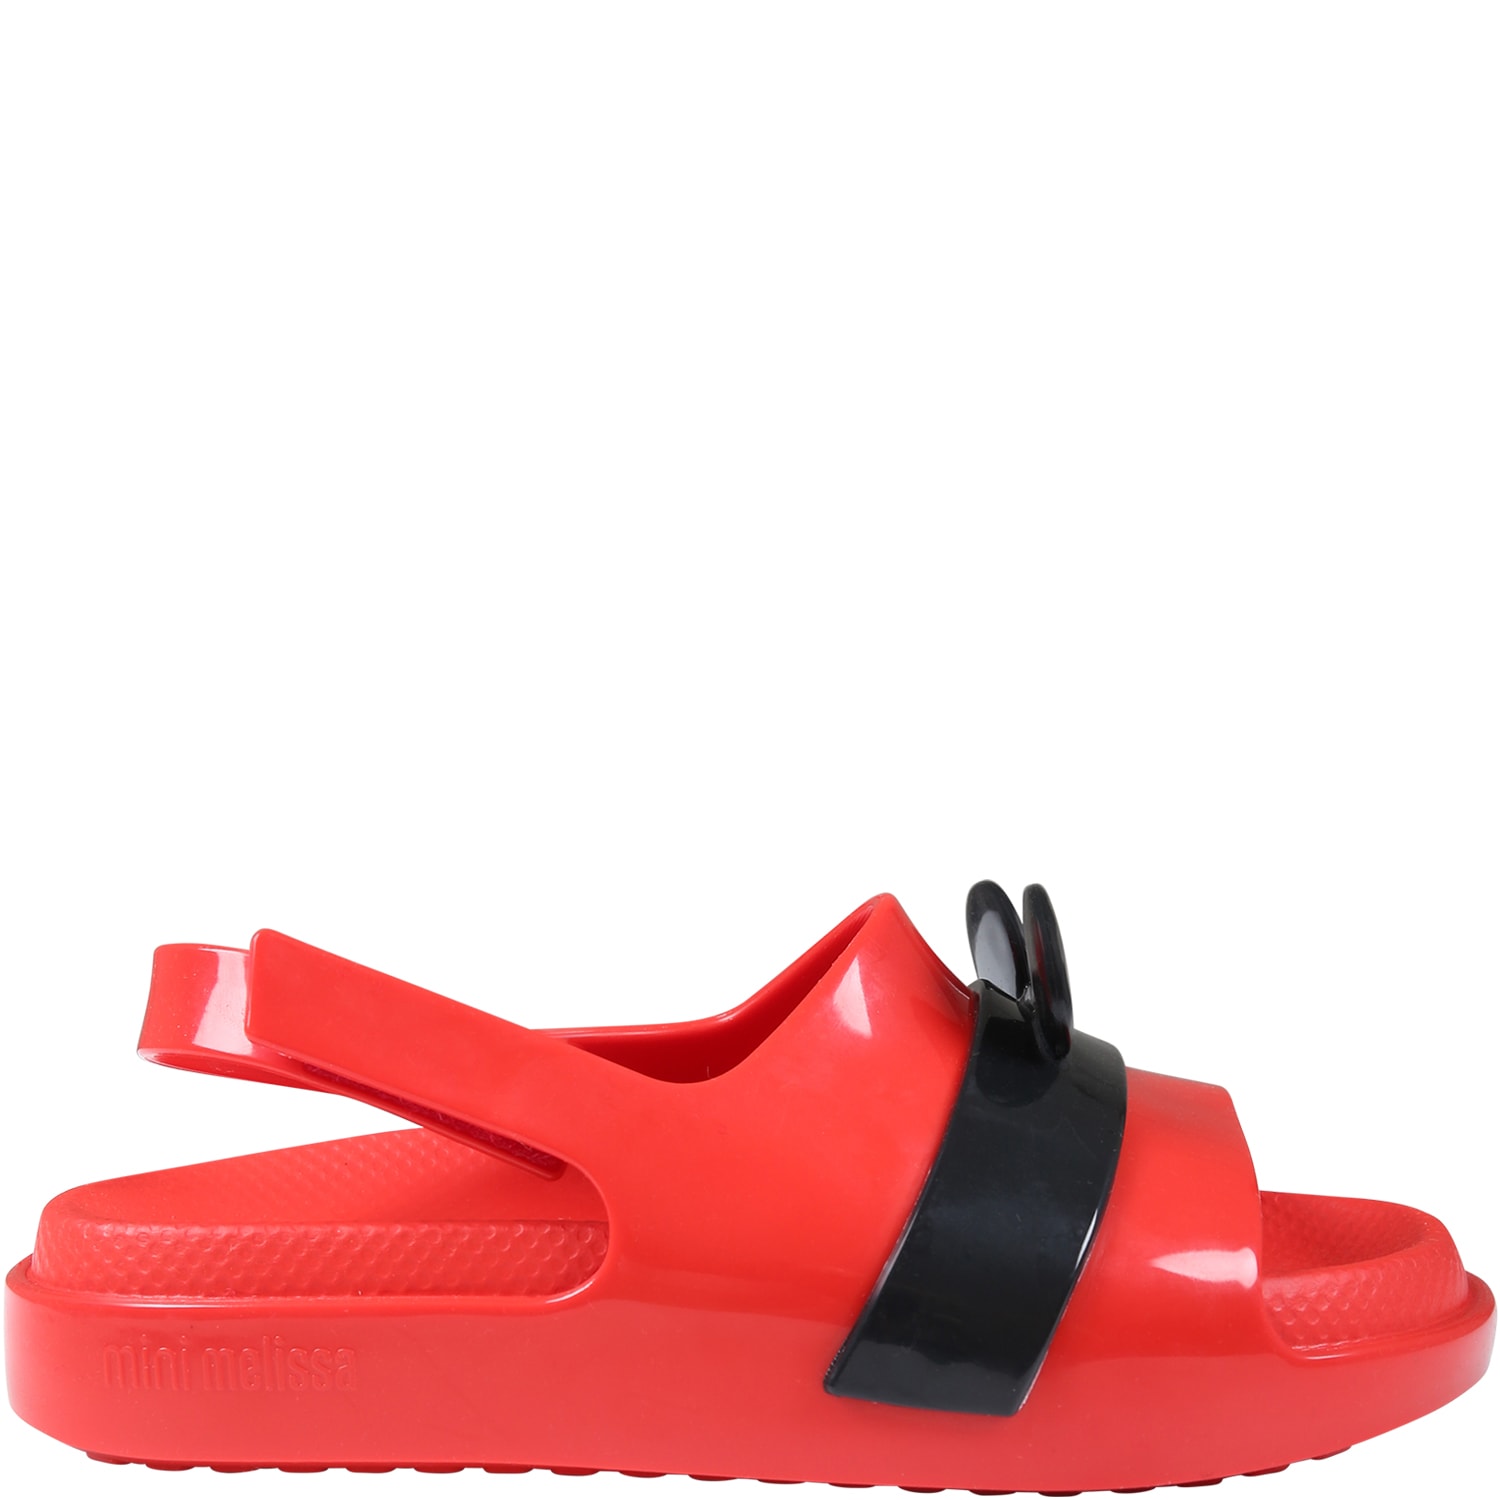 Melissa Red Sandals For Kids With Micki Mouse Ears